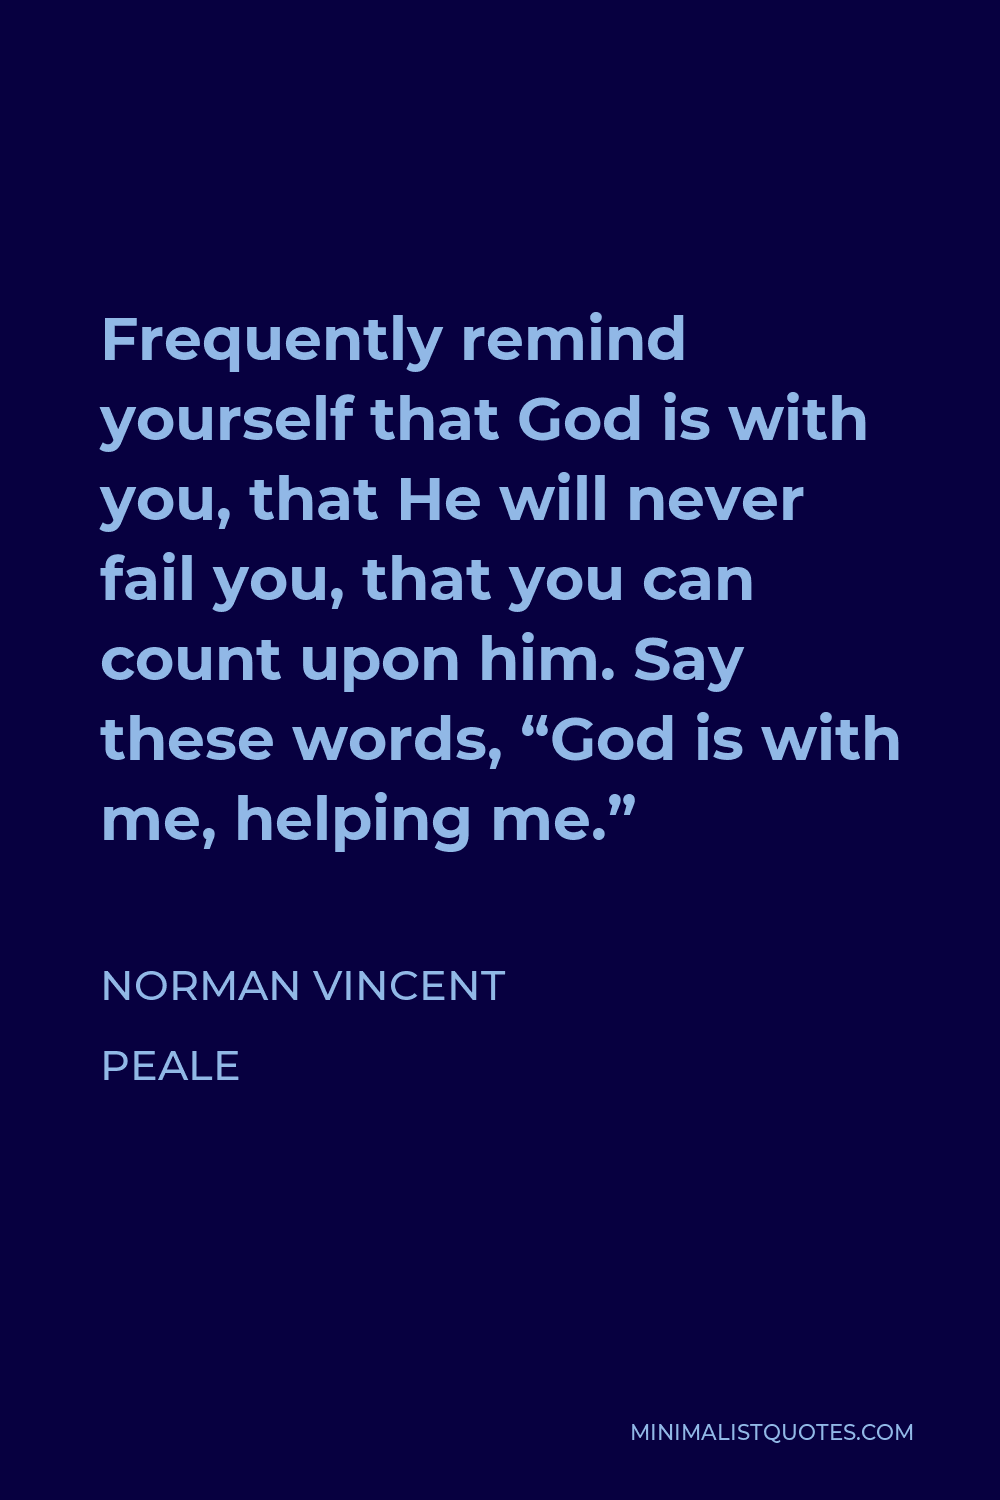 Norman Vincent Peale Quote - Frequently remind yourself that God is with you, that He will never fail you, that you can count upon him. Say these words, “God is with me, helping me.”